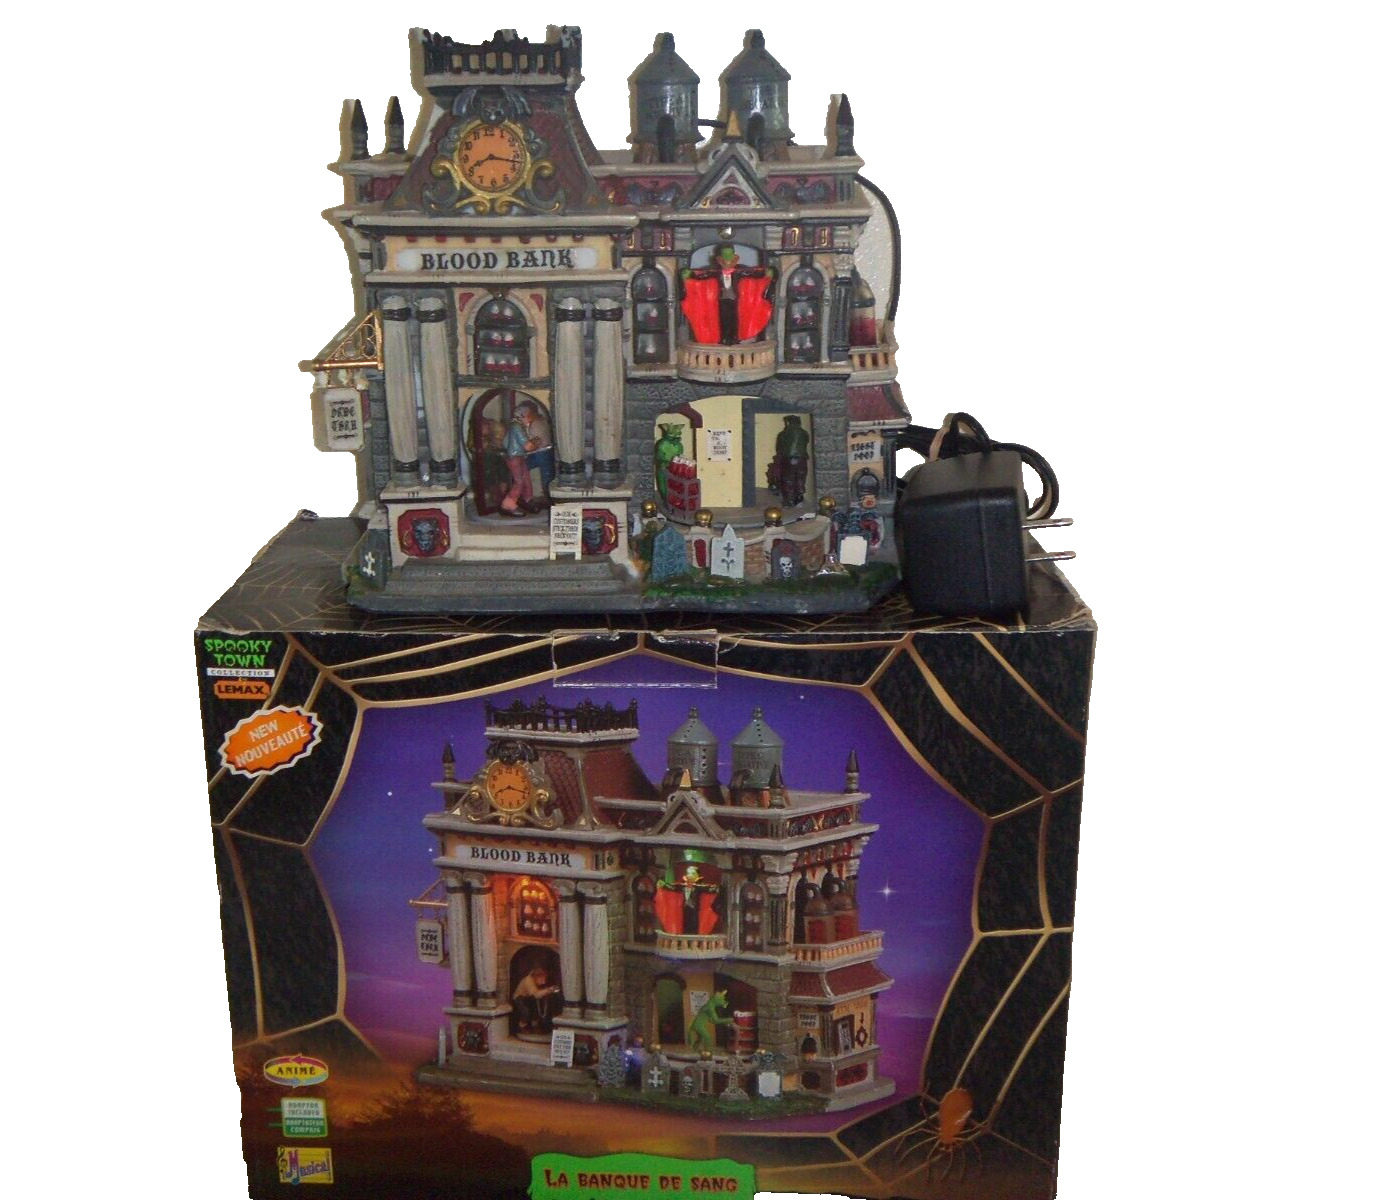 RETIRED 2005  LEMAX SPOOKY TOWN COLLECTION THE BLOOD BANK READ